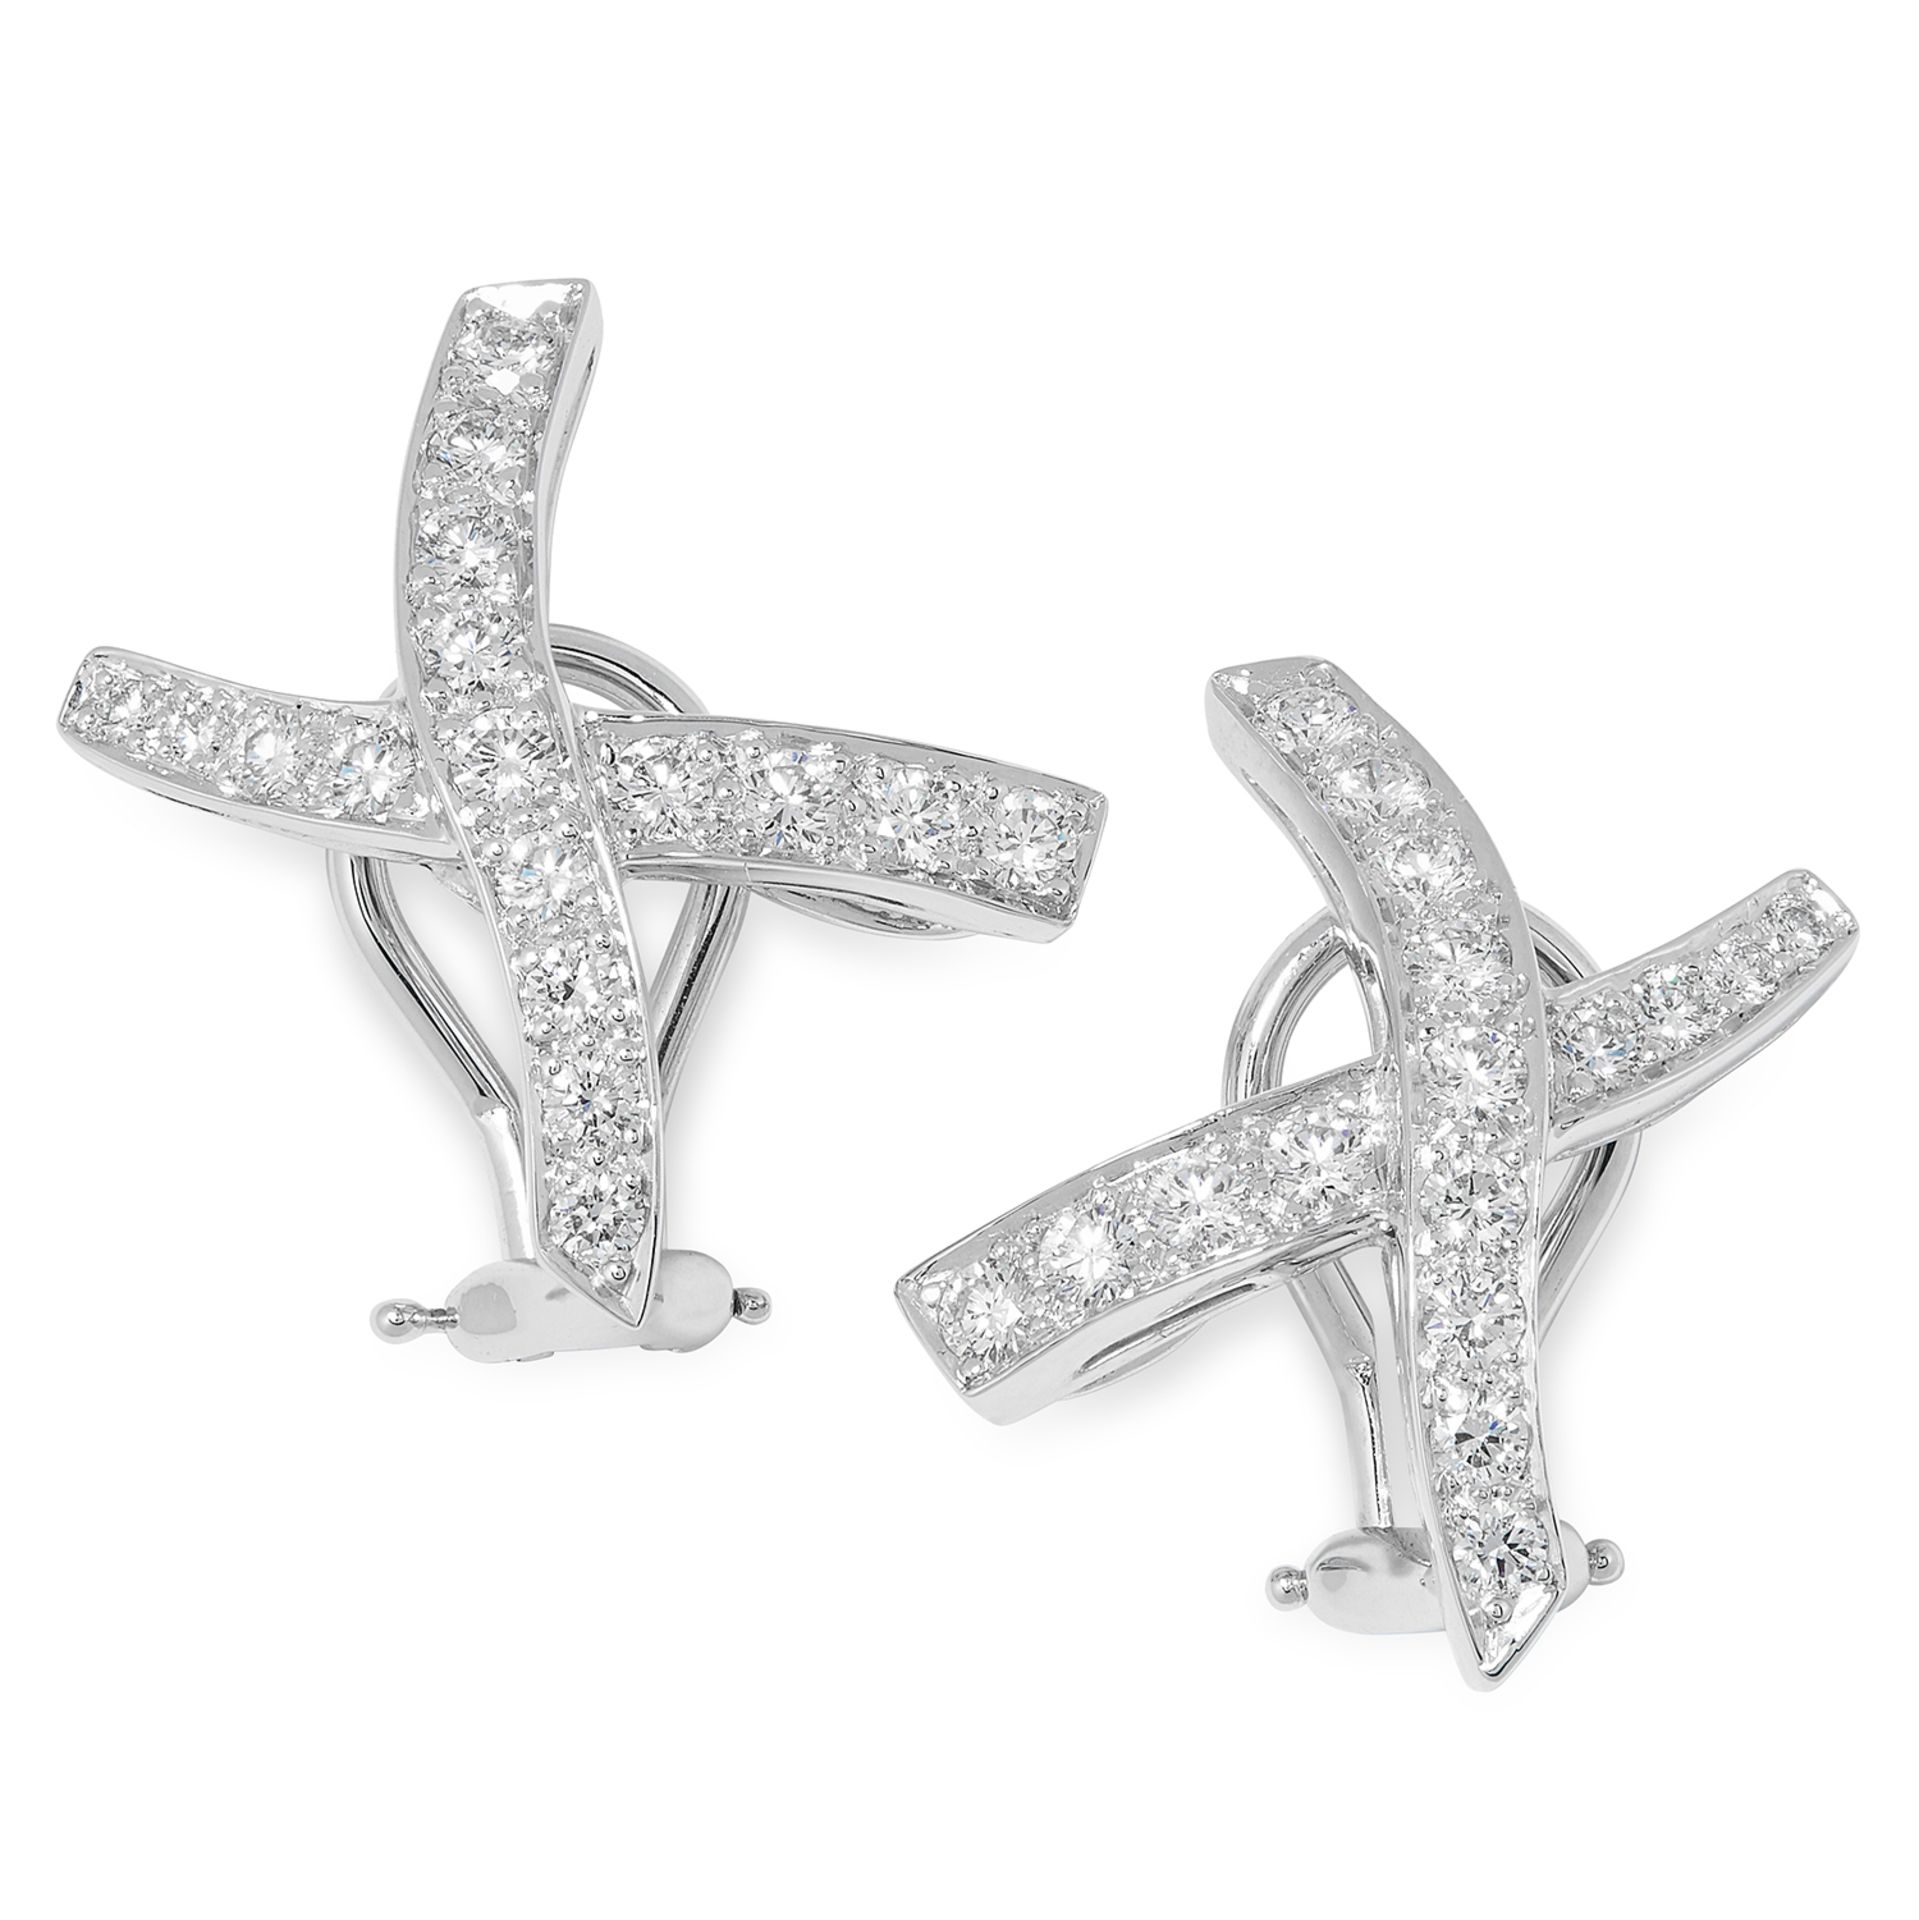 A PAIR OF DIAMOND KISS EARRINGS, PALOMA PICASSO FOR TIFFANY & CO the stylised X motifs set with